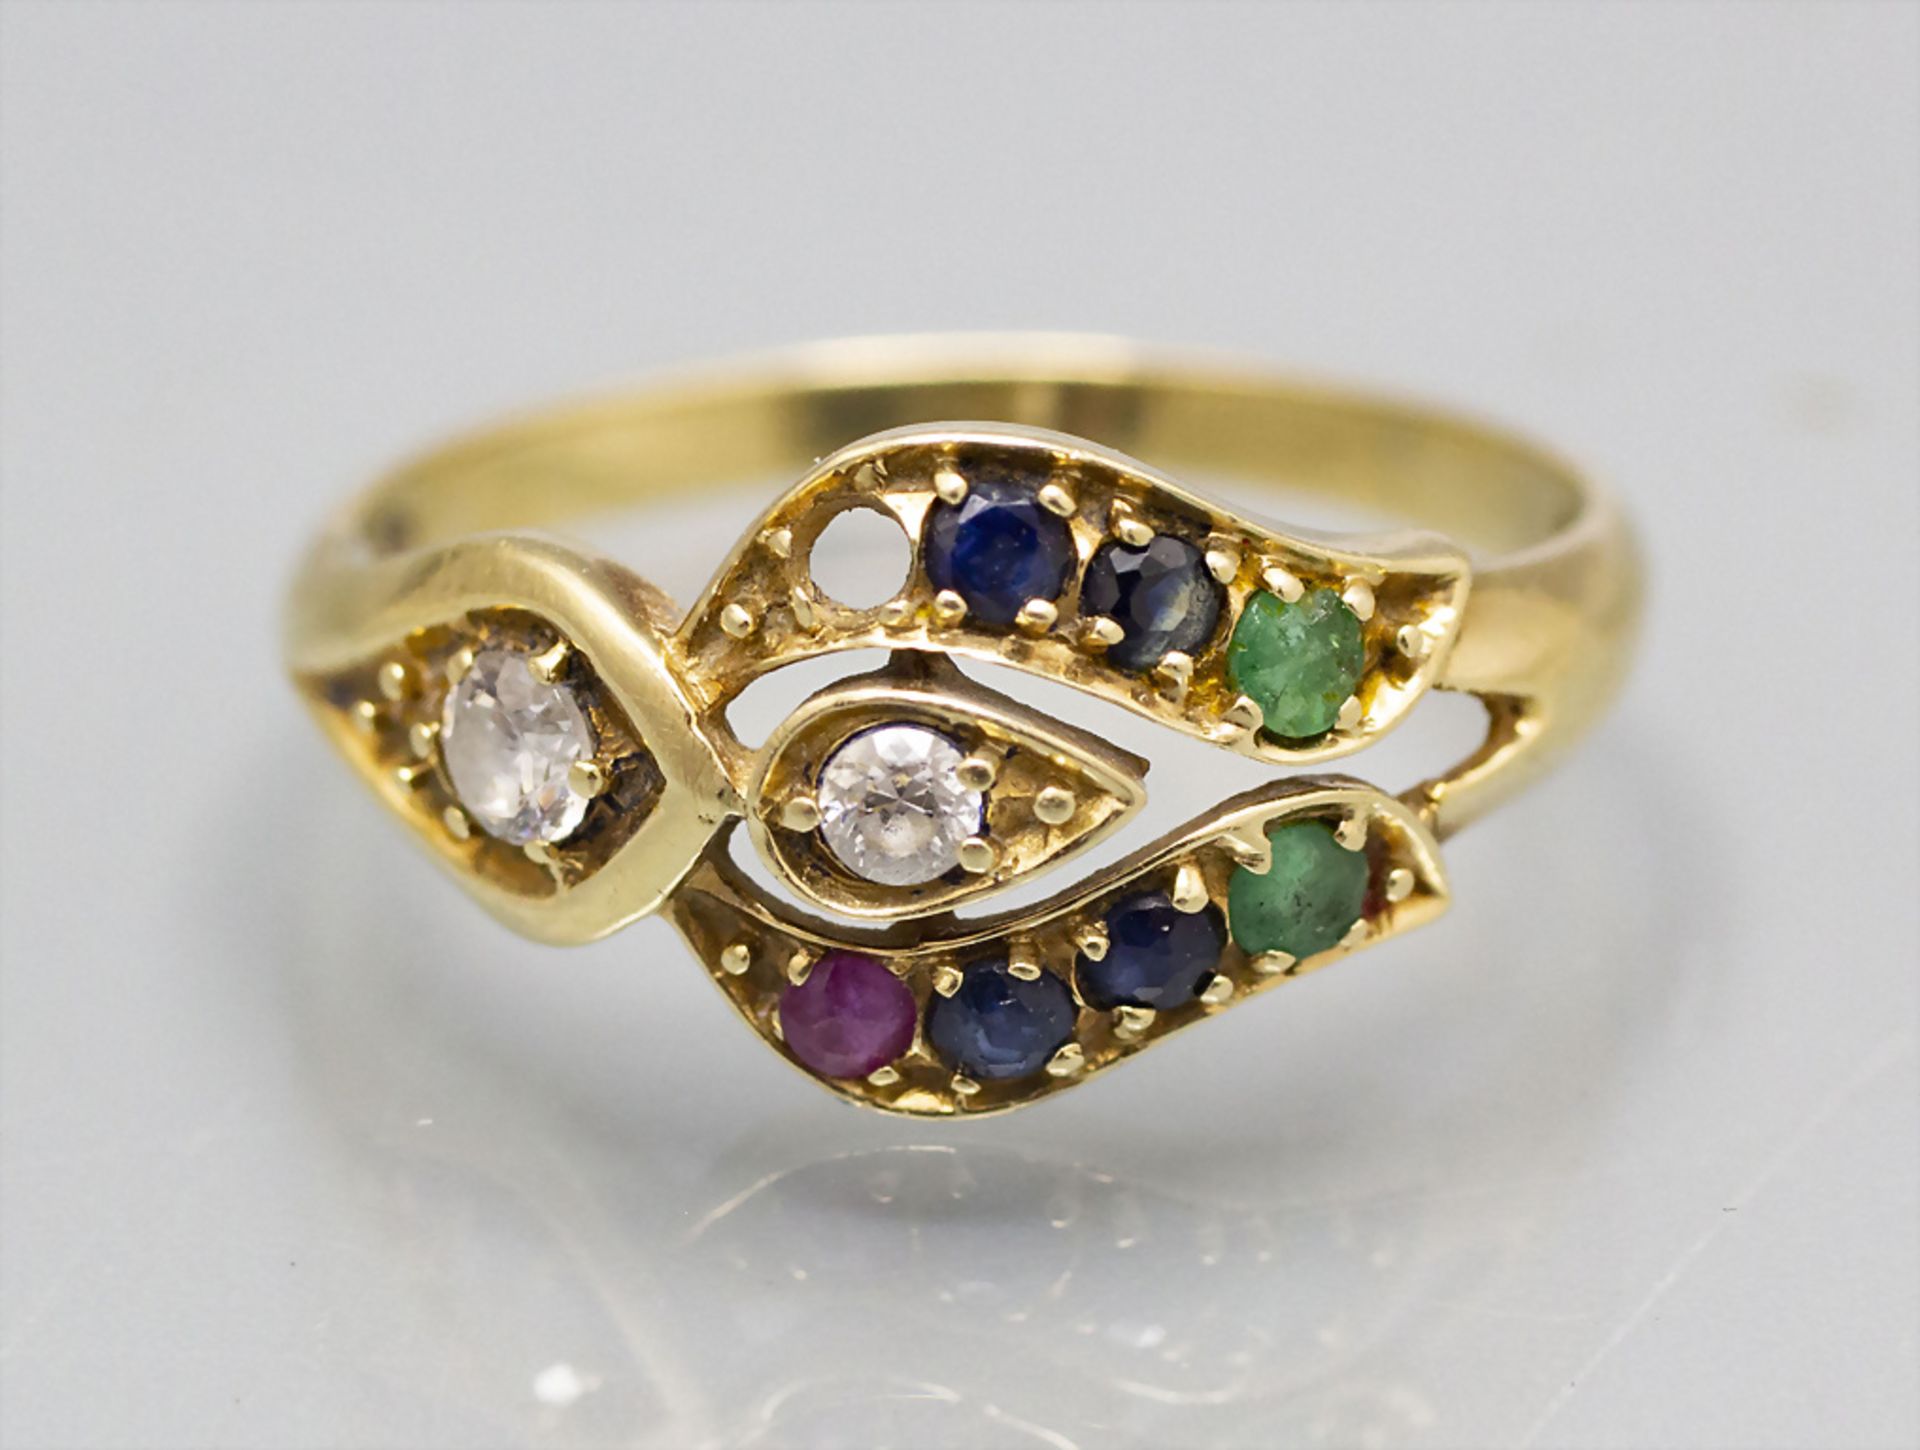 Damenring / A ladies 14 ct gold ring with diamonds, sapphires, emeralds, ruby